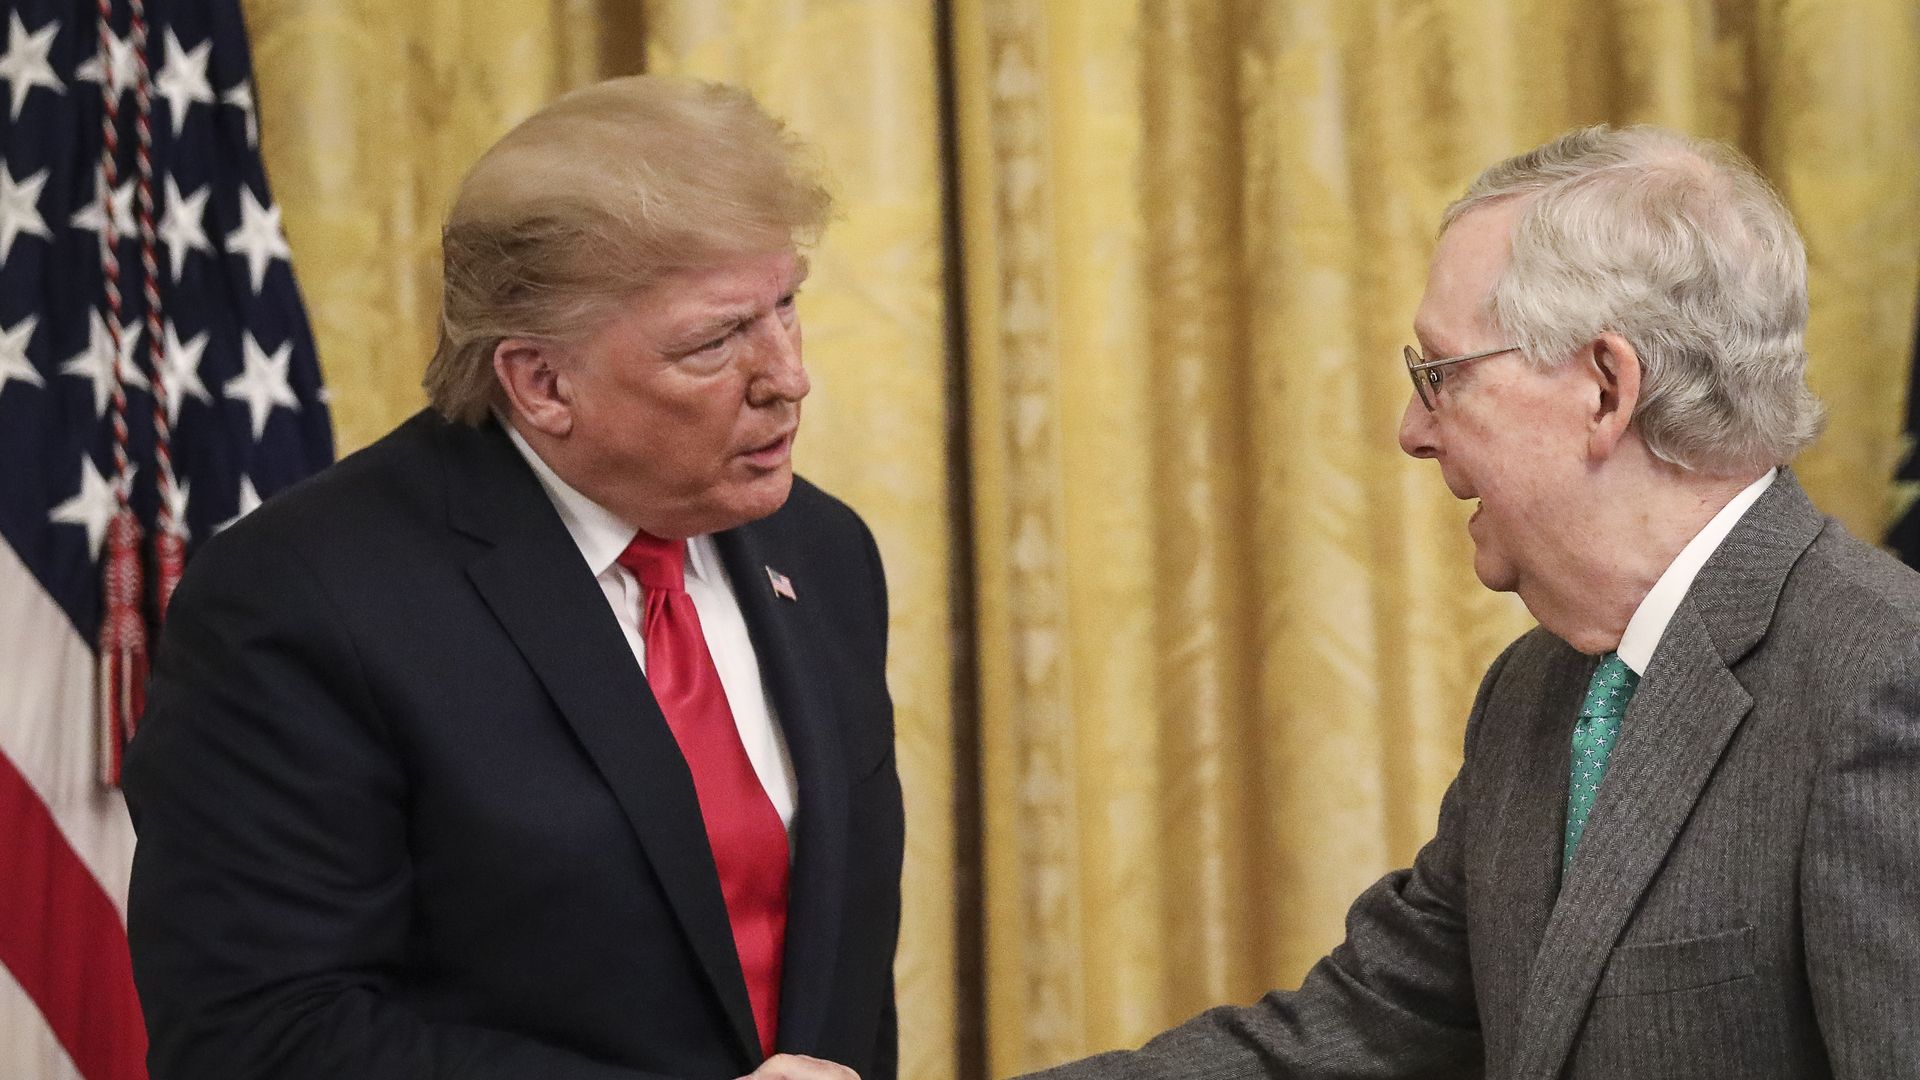 Trump and McConnell